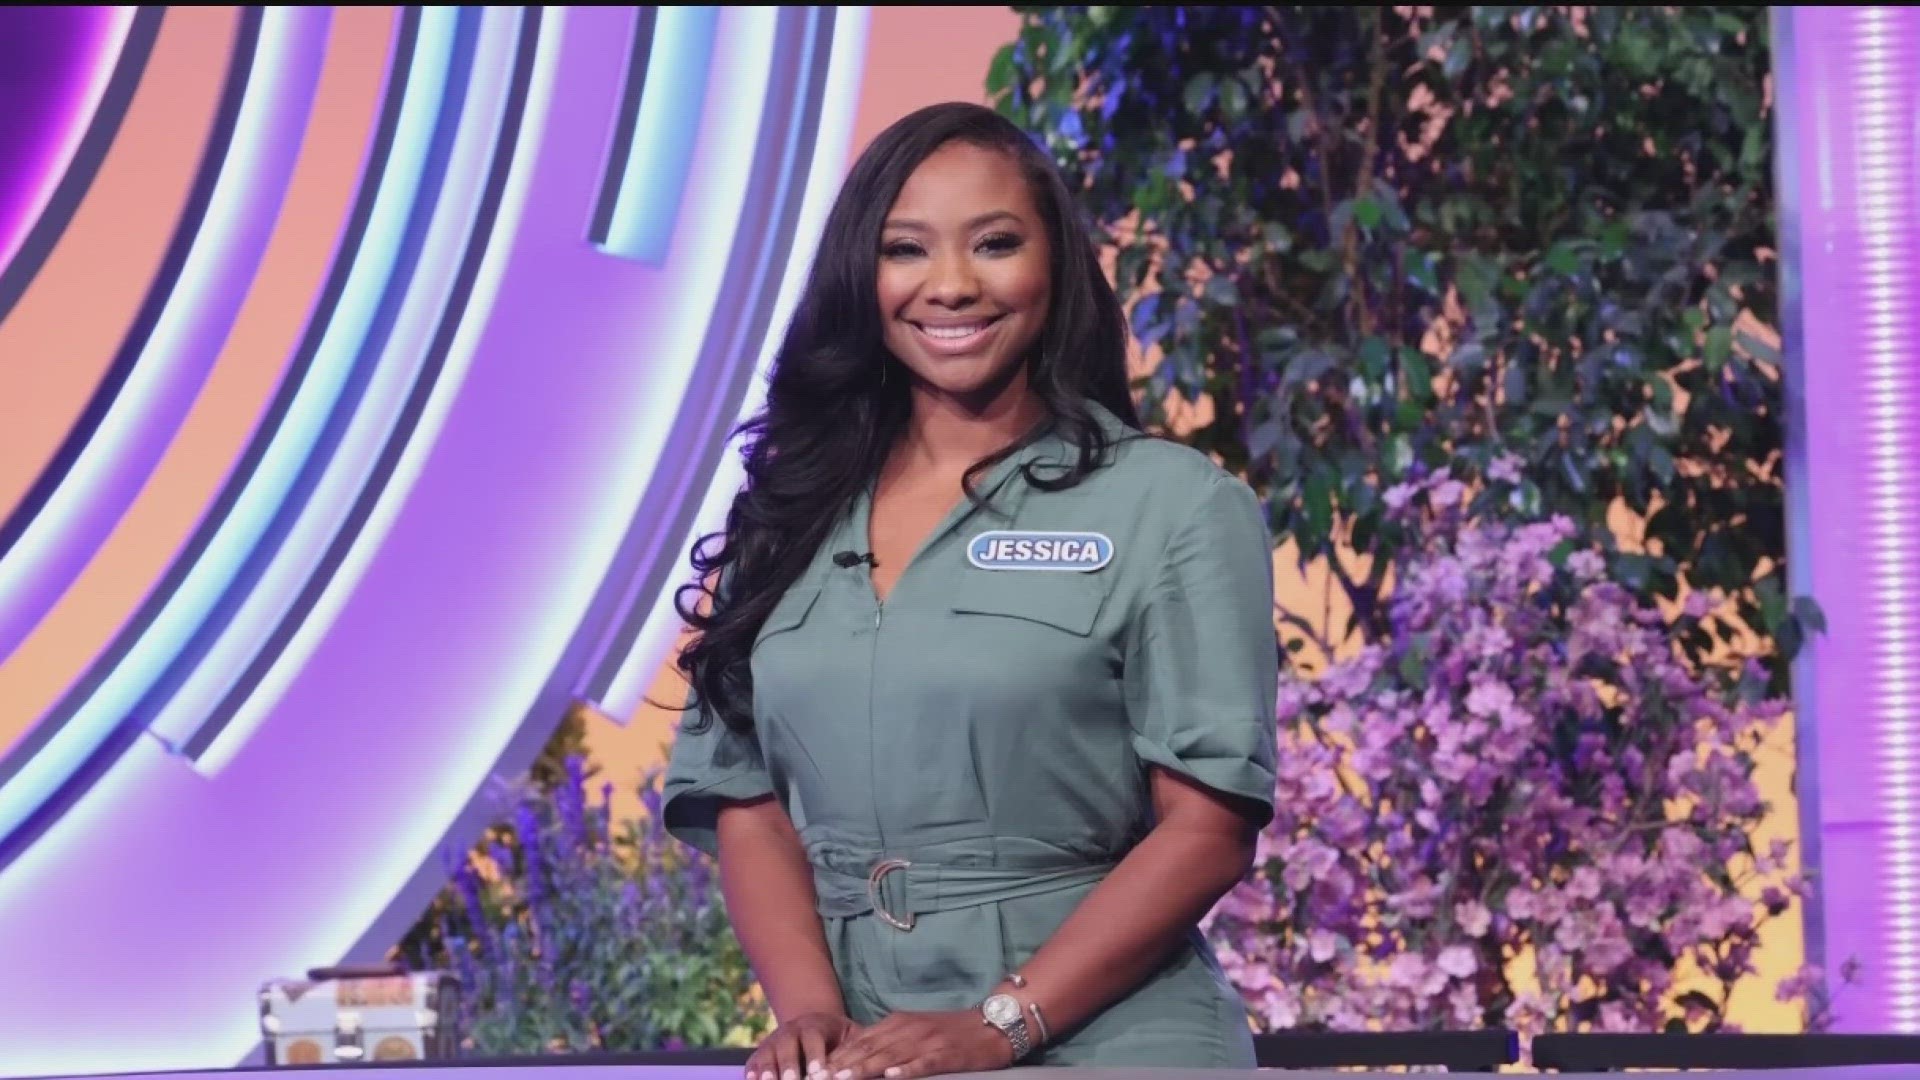 An Atlanta woman got her chance to spin the wheel on the "Wheel of Fortune," a moment she said was a dream come true.